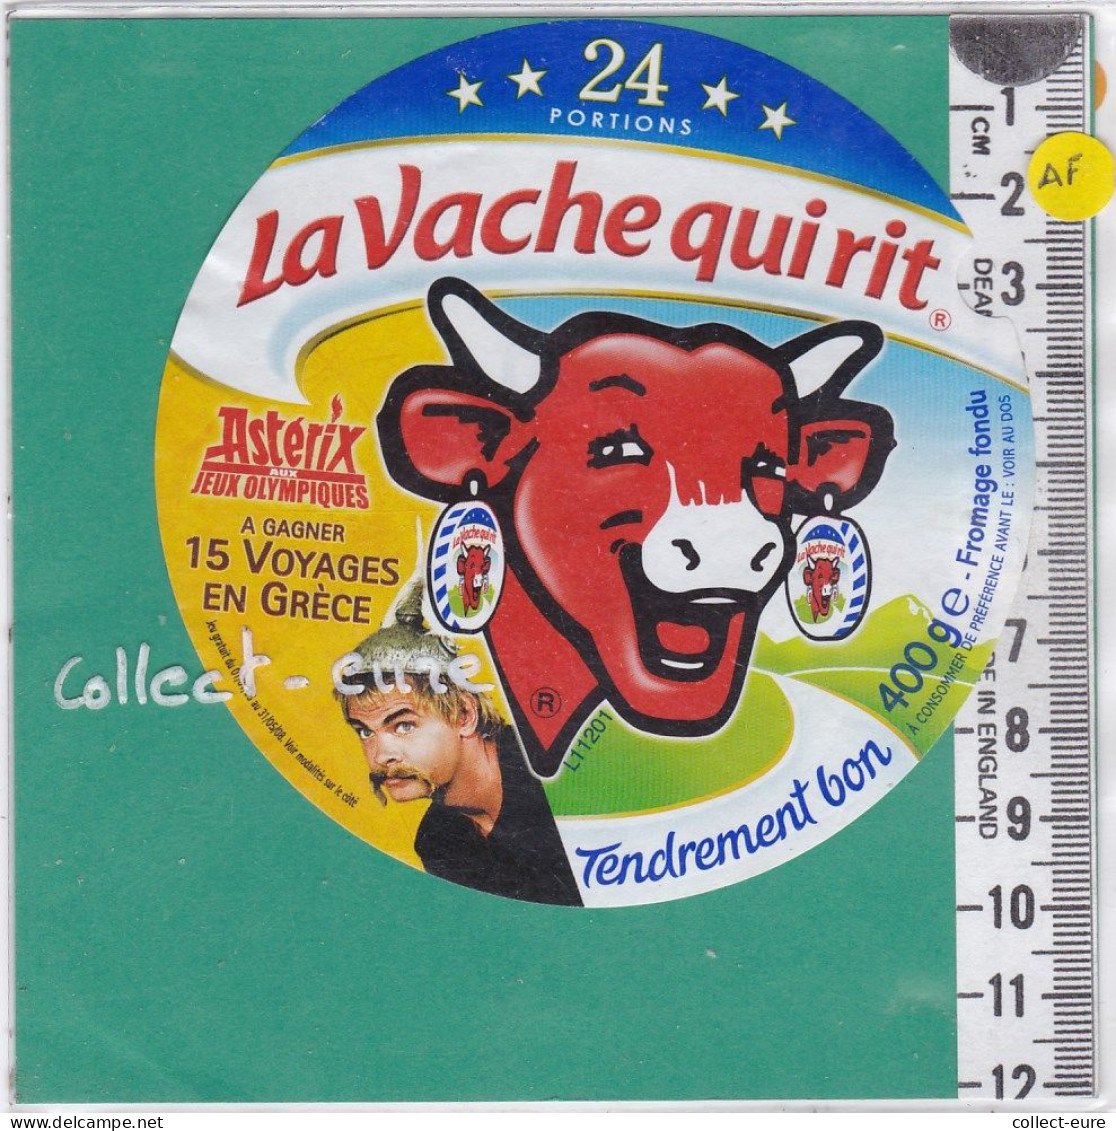 C1267 FROMAGE FONDU VACHE QUI RIT ASTERIX JEUX OLYMPIQUES 24 PORTIONS 400 G   L 11 201 - Cheese